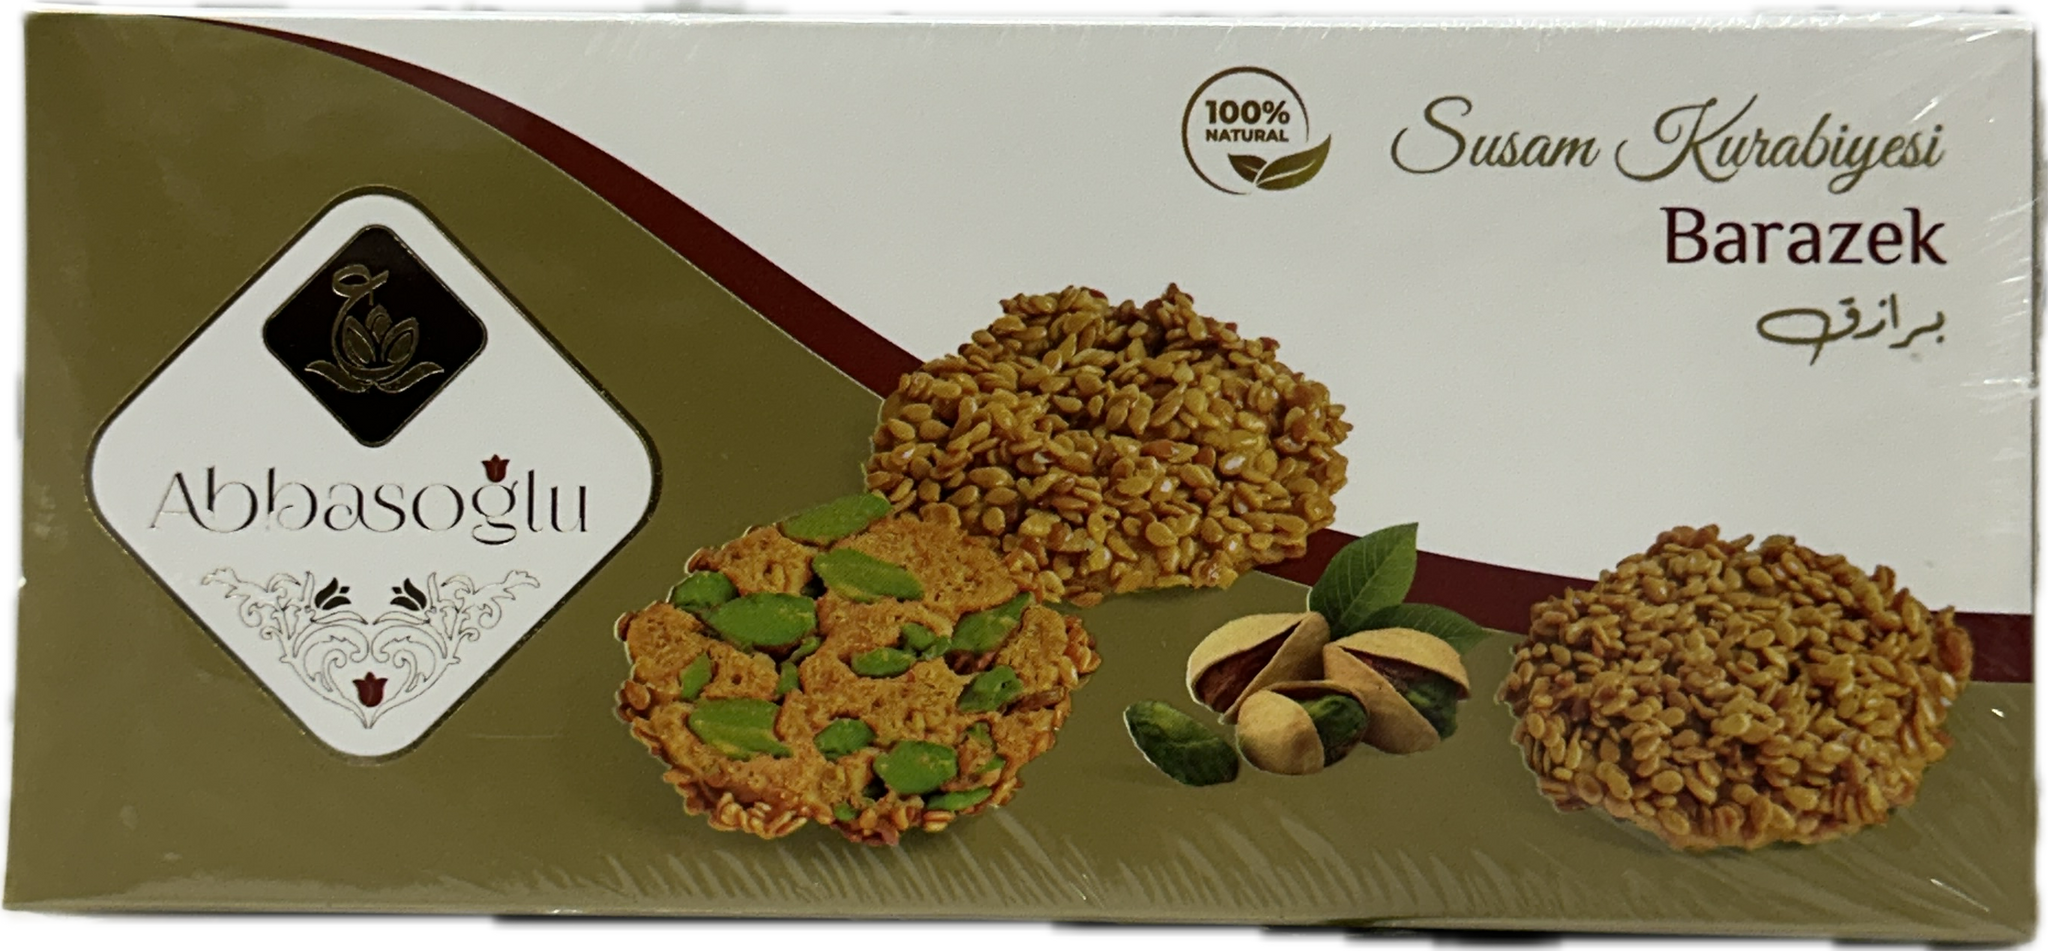 Abbas Oglu Mixed Baklava and Maamoul Cookies (Variety Pack or Individual 200g)